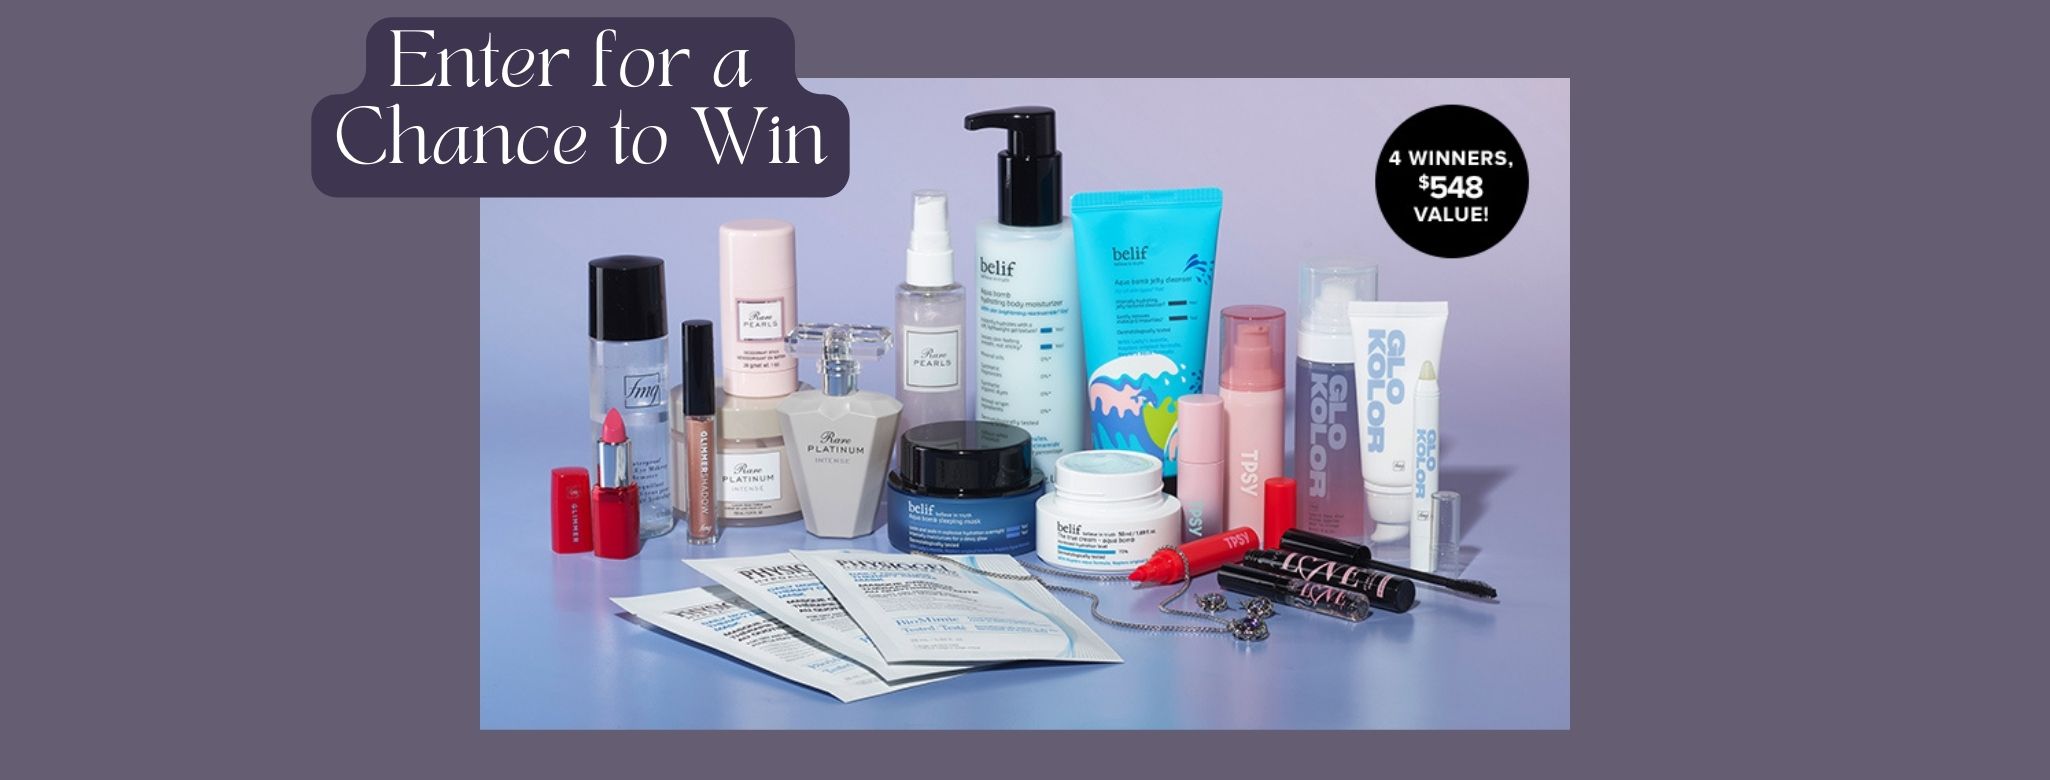 Summer Radiance Sweepstakes